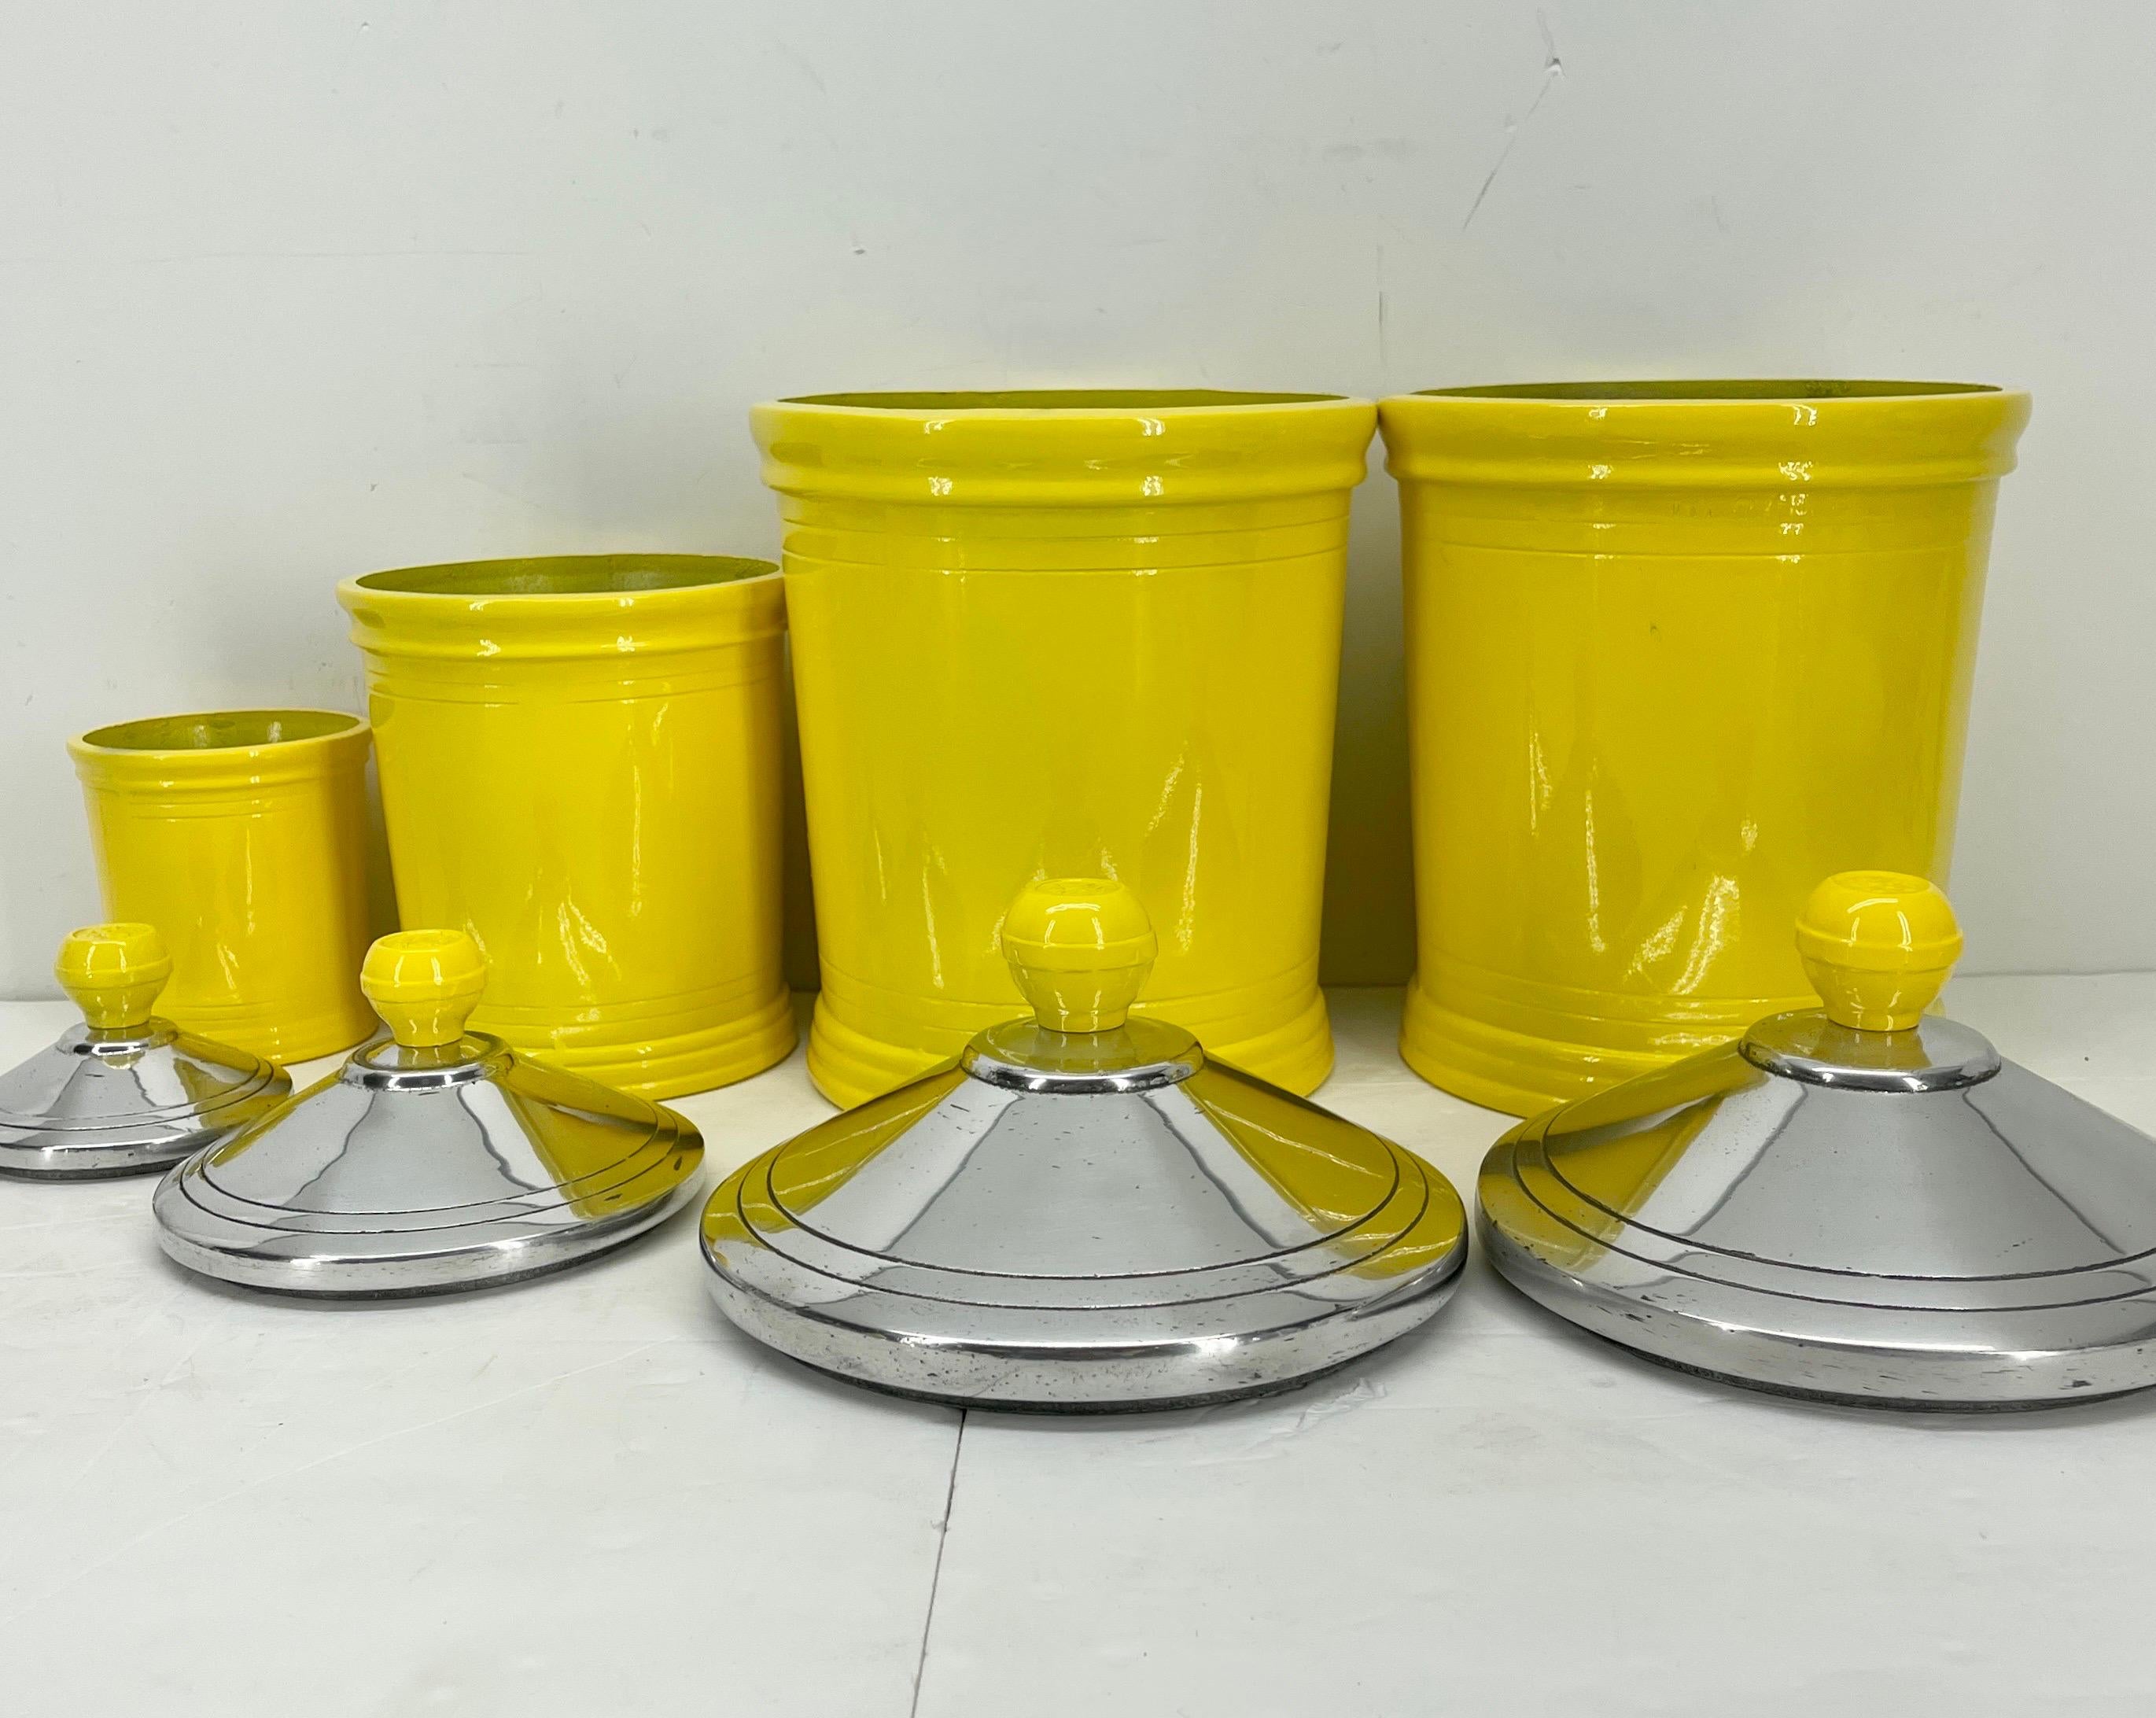 Mid-20th Century Vintage Kitchen or Bathroom Canister Jars Set, Bright Yellow Powder Coated